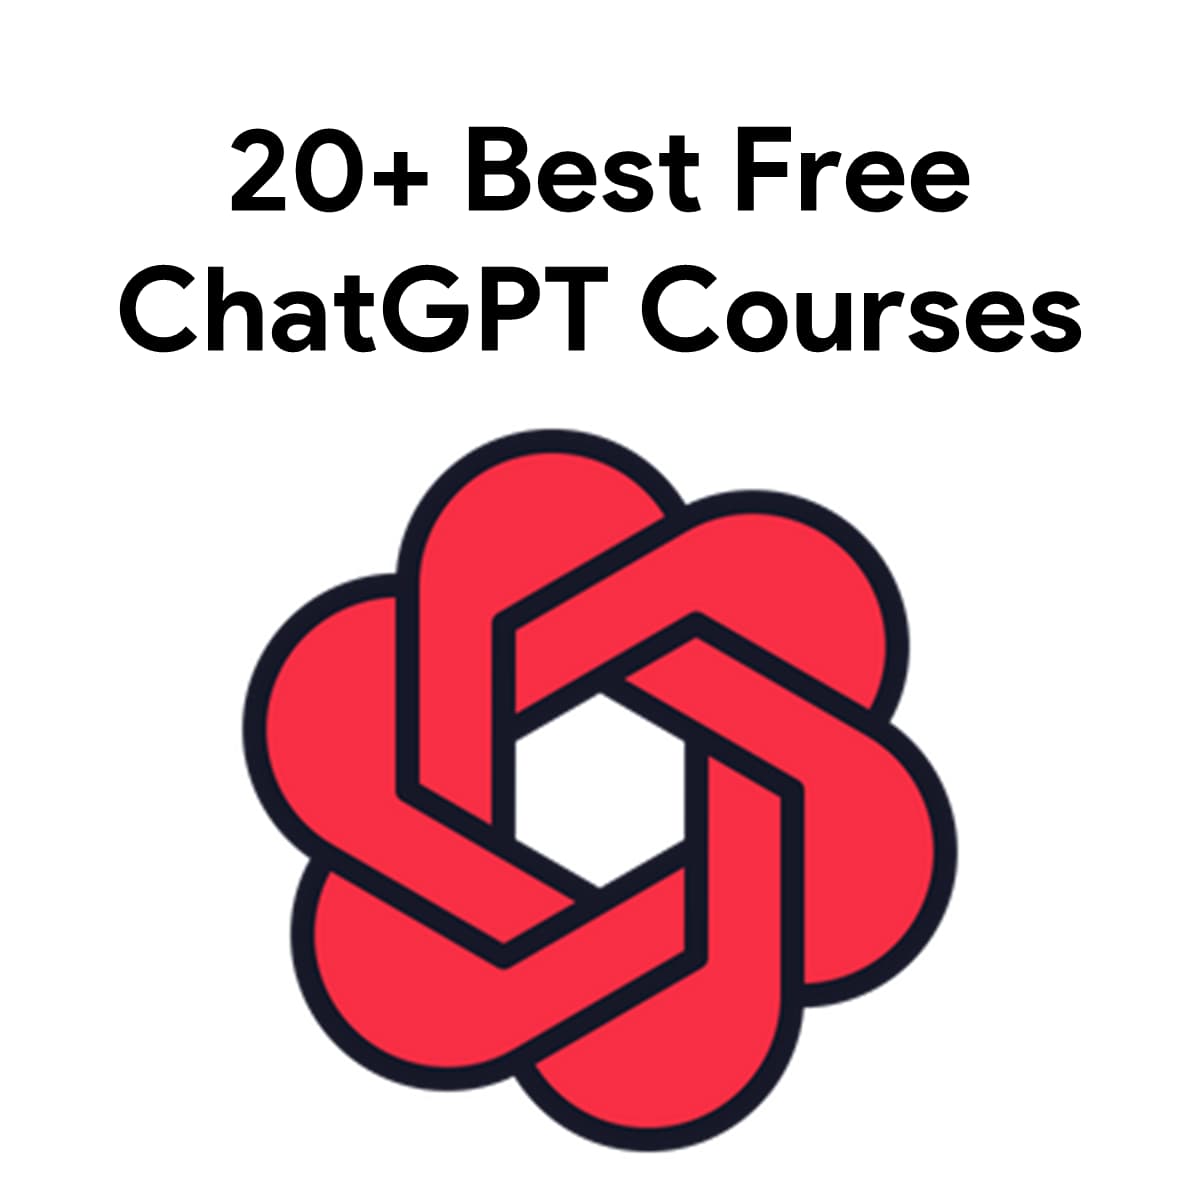 Free ChatGPT Courses